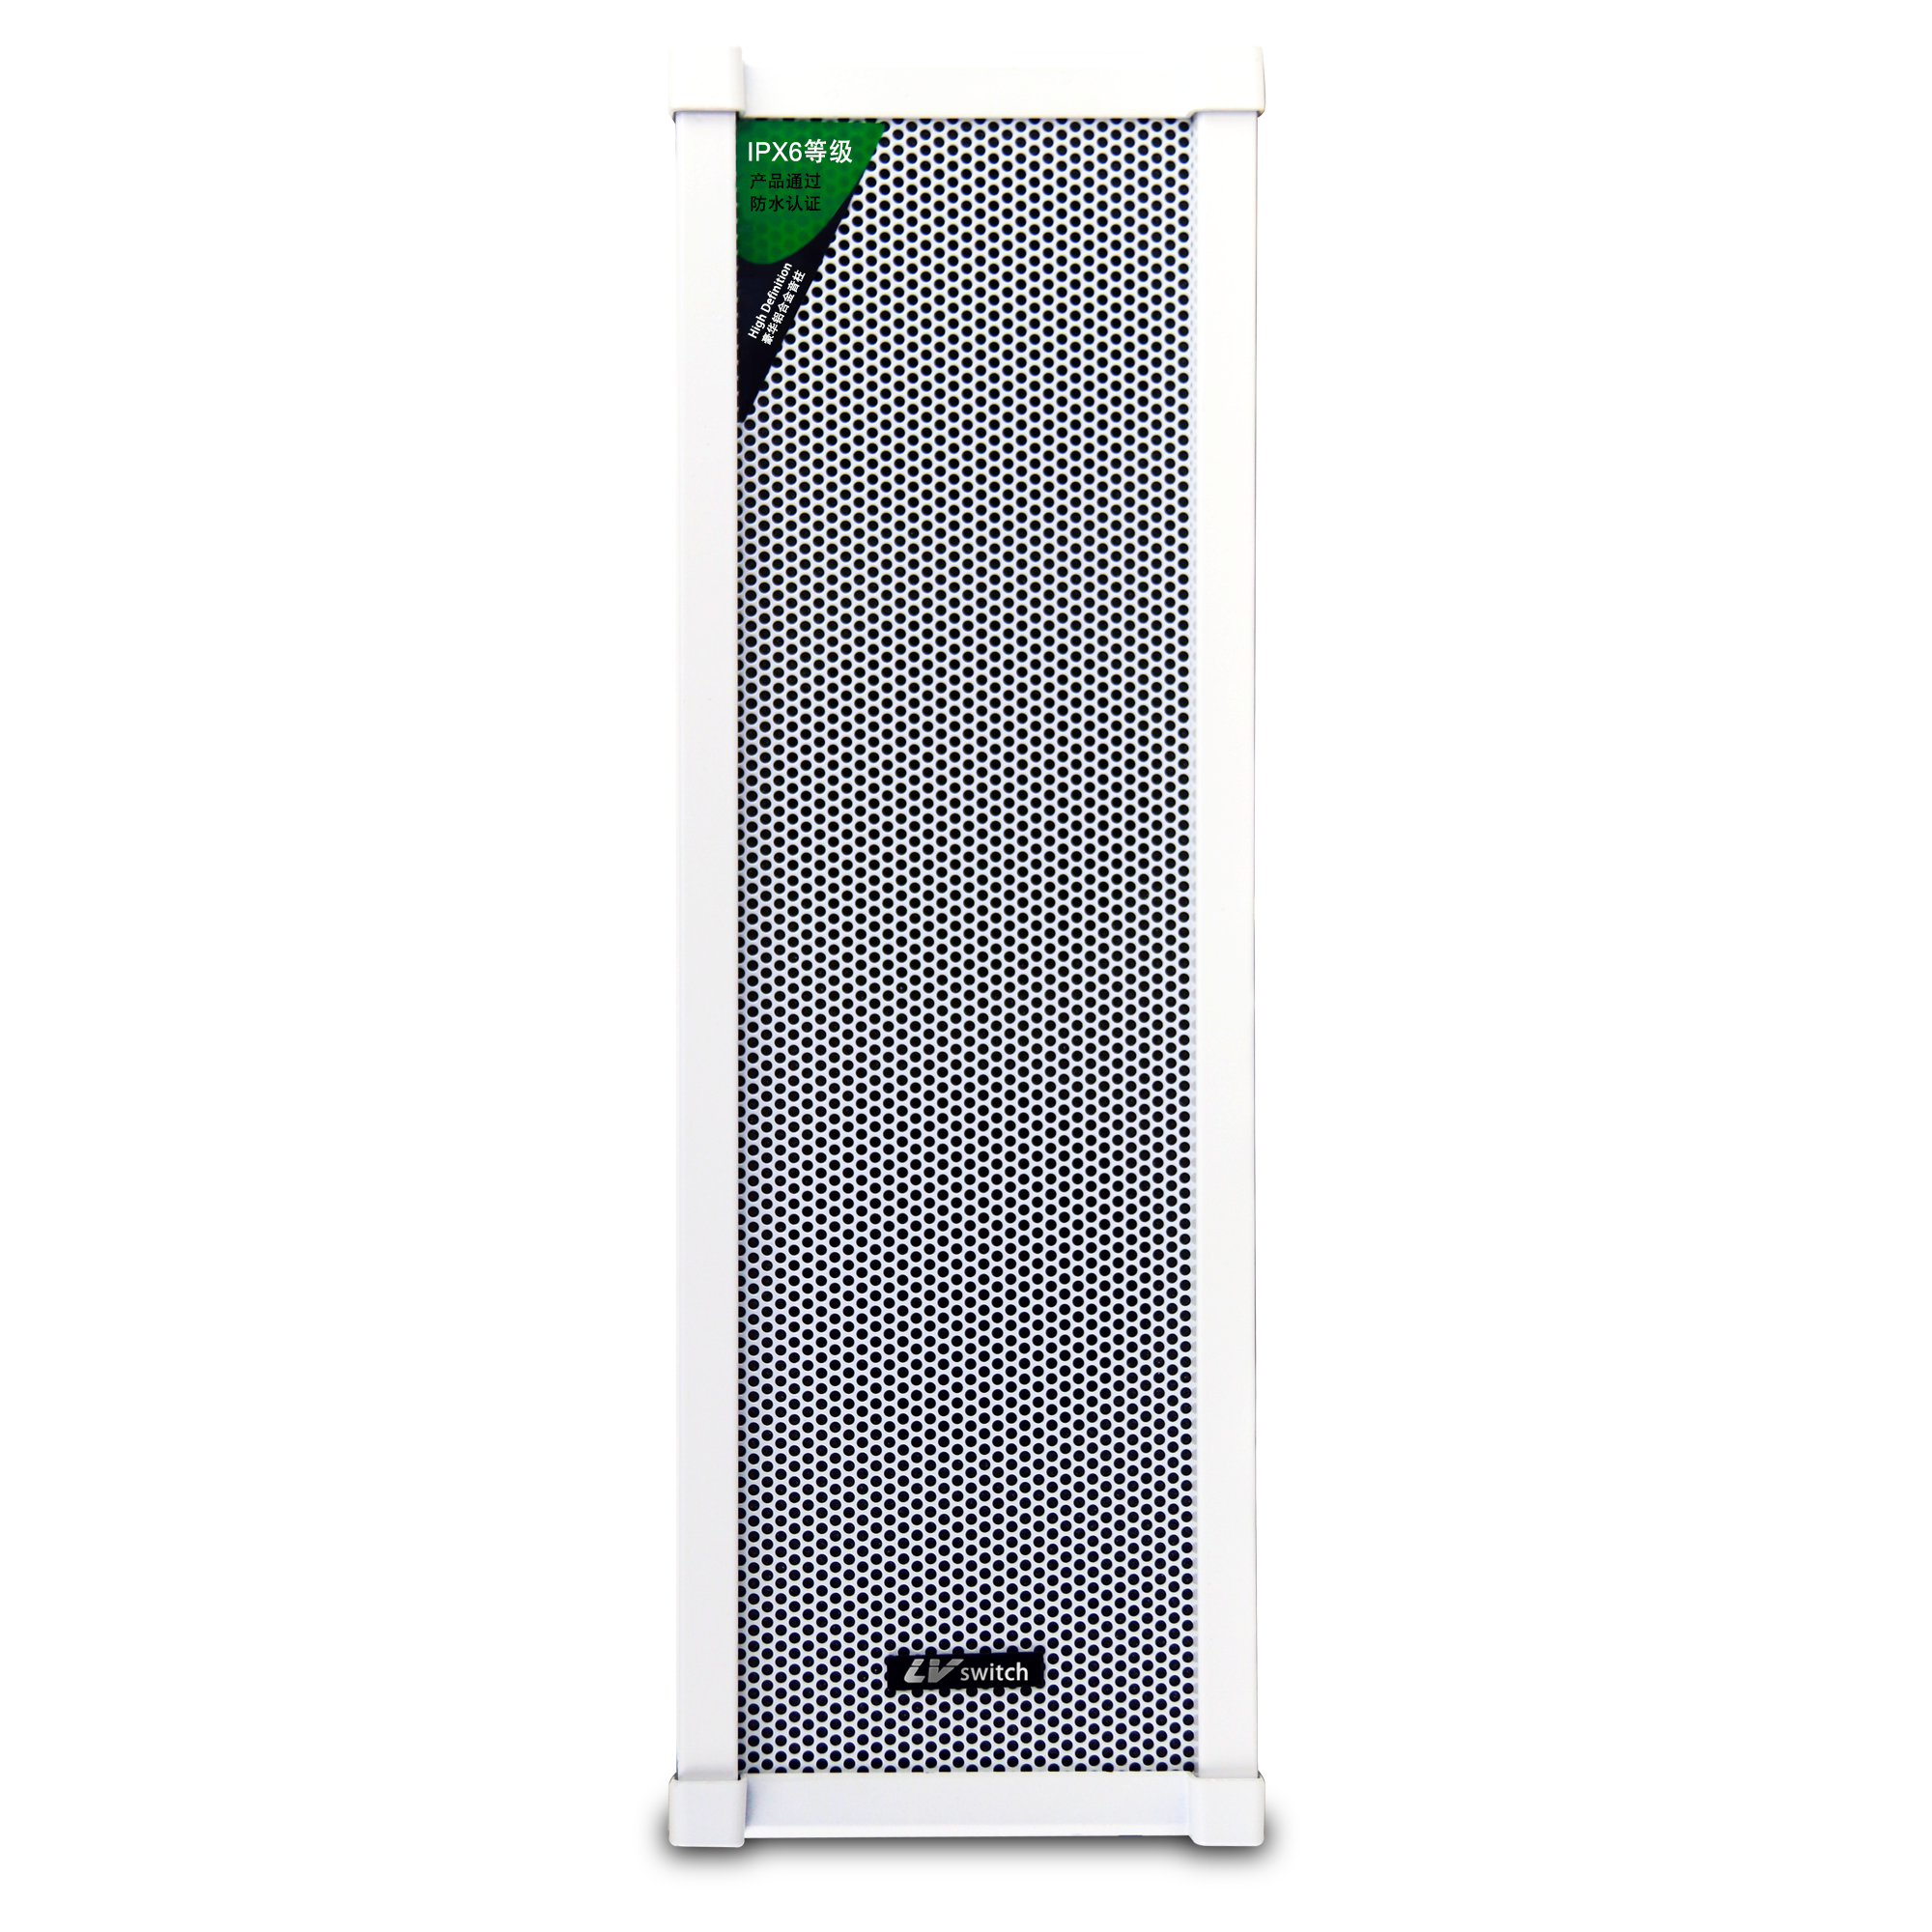 SIP-S100,a 30W high-fidelity speaker with rich functions, durable and waterproof